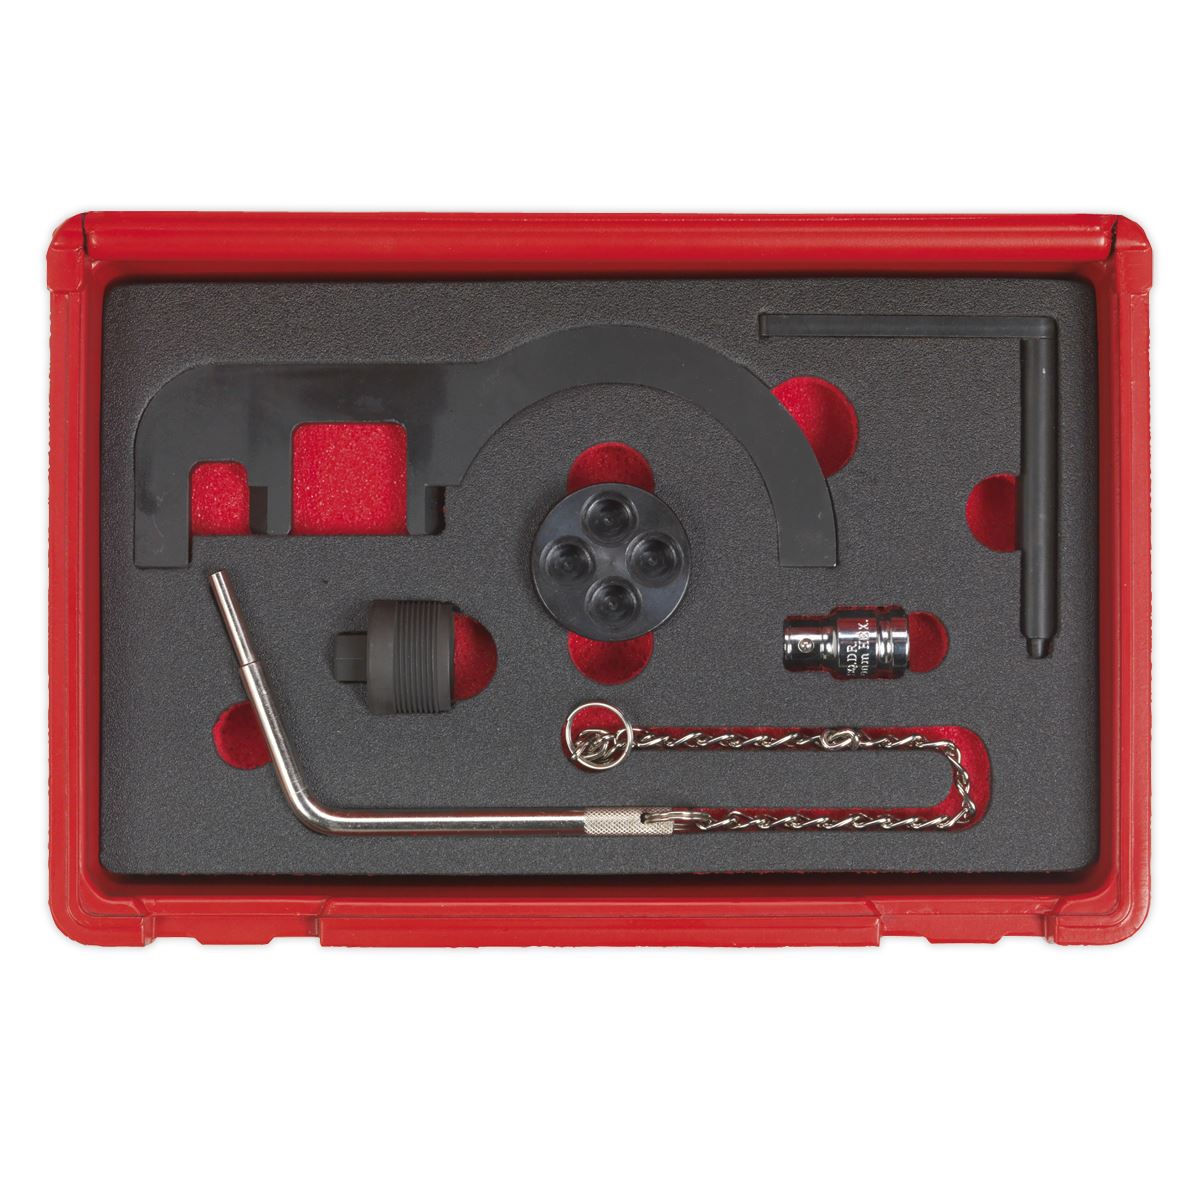 Sealey Diesel Engine Timing Tool Kit - for BMW/Mini 1.5D/1.6D/2.0D/3.0D - Chain Drive